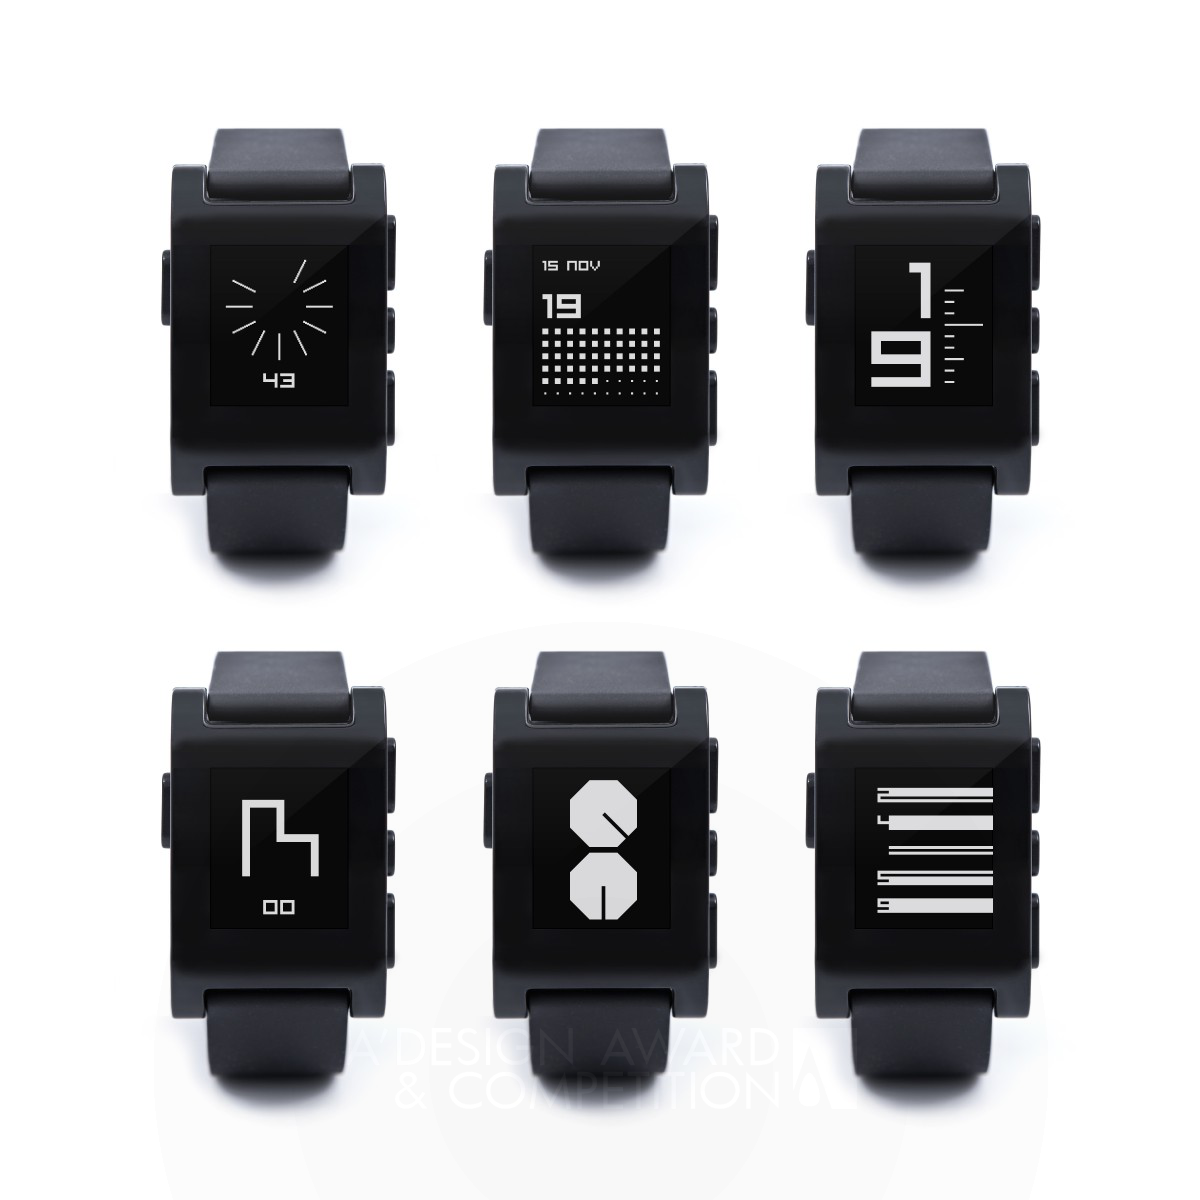 TTMM (after time) Watchface Apps Collection by Albert Salamon Golden Interface, Interaction and User Experience Design Award Winner 2014 